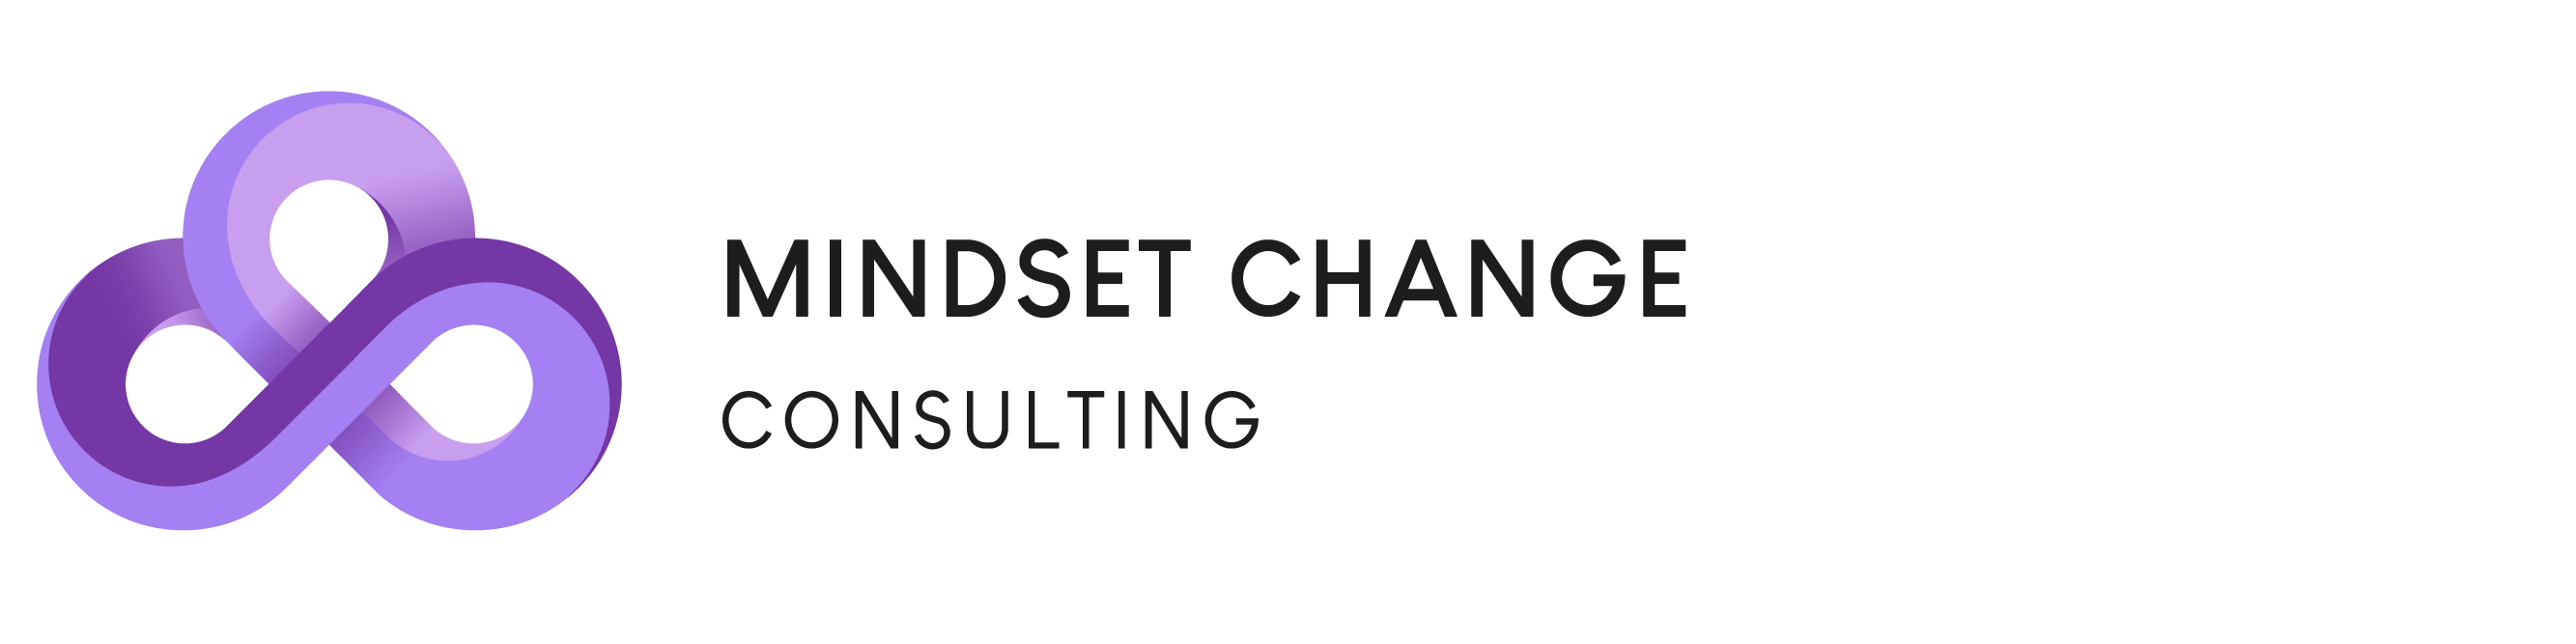 Mindset Change Consulting